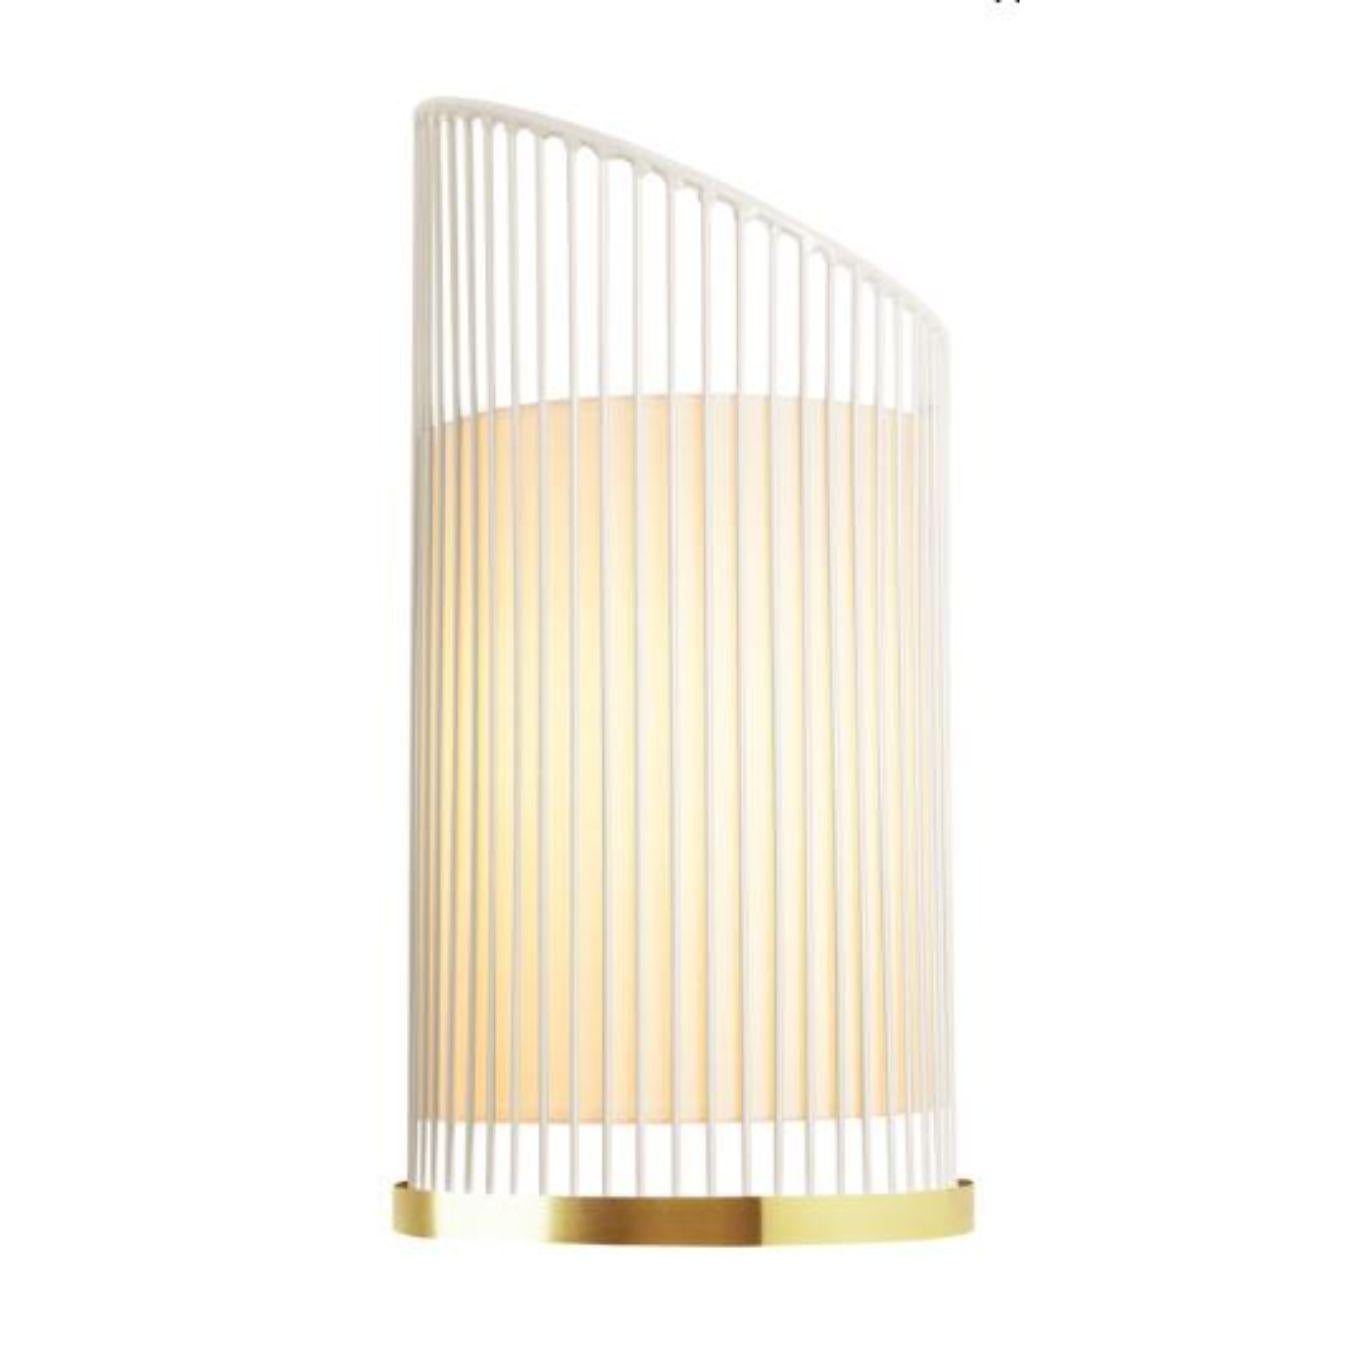 Ivory new spider wall lamp with brass ring by Dooq.
Dimensions: W 25x D 15x H 50cm.
Materials: lacquered metal, polished or brushed metal, brass.
abat-jour: cotton
Also available in different colors and materials. 

Information:
230V/50Hz
E14/1x15W